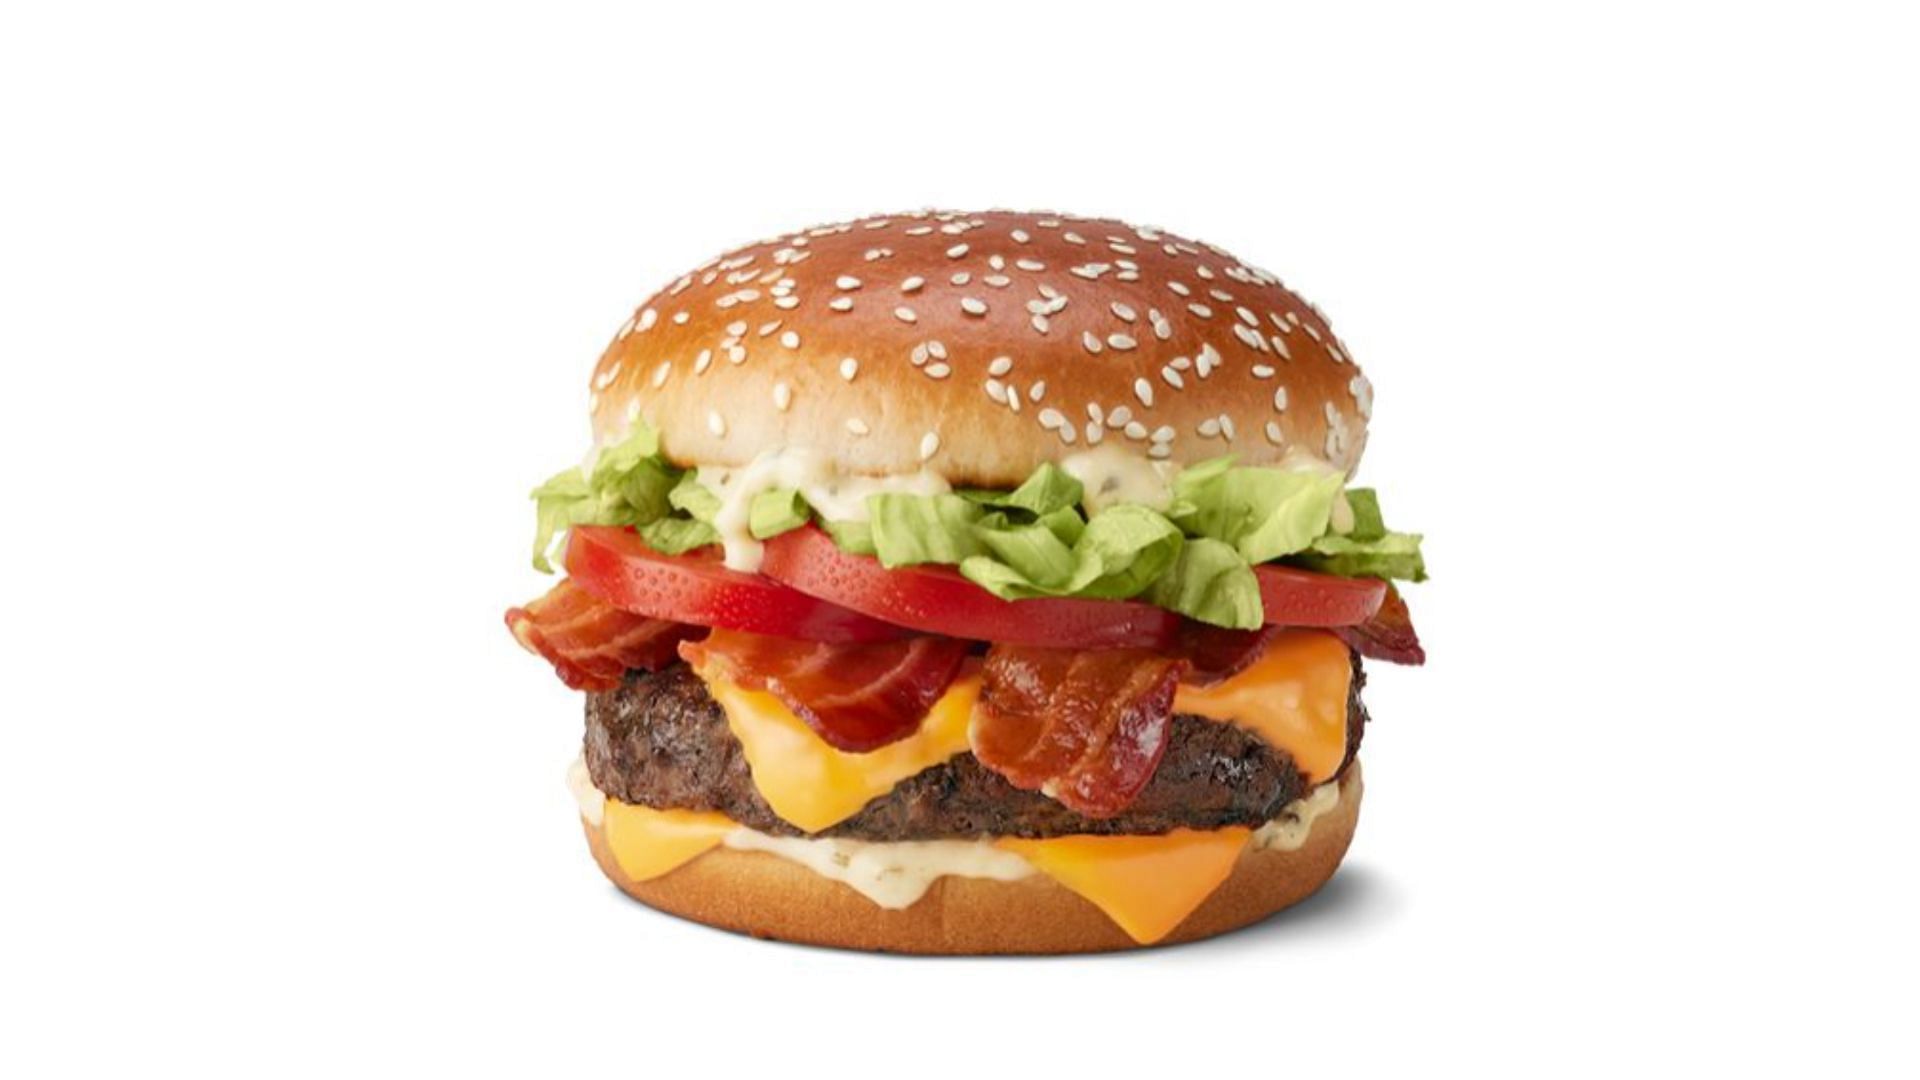 Promotional image of the Smoky BLT Quarter Pounder with Cheese (Image via McDonald&rsquo;s)